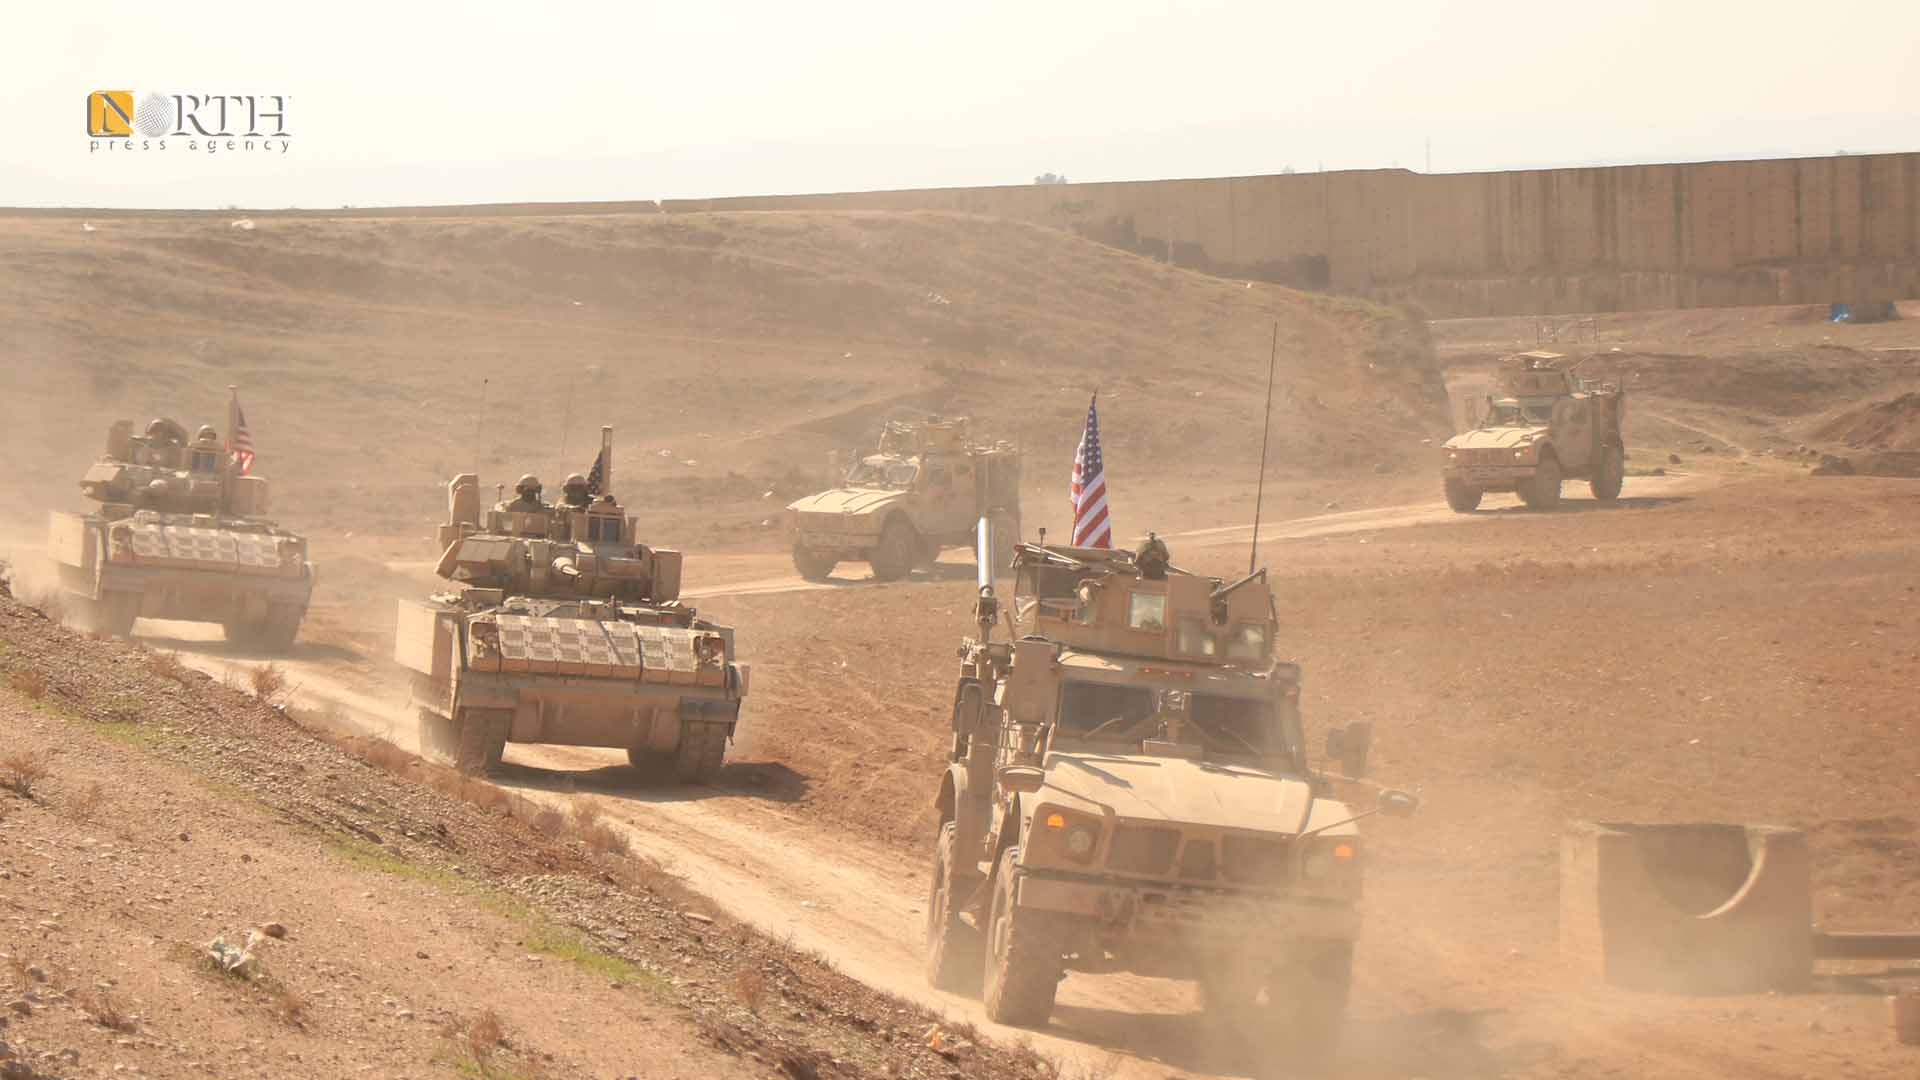 Turkey Obtains “No U.S. Green Light” For Operation In NE Syria – U.S. Official